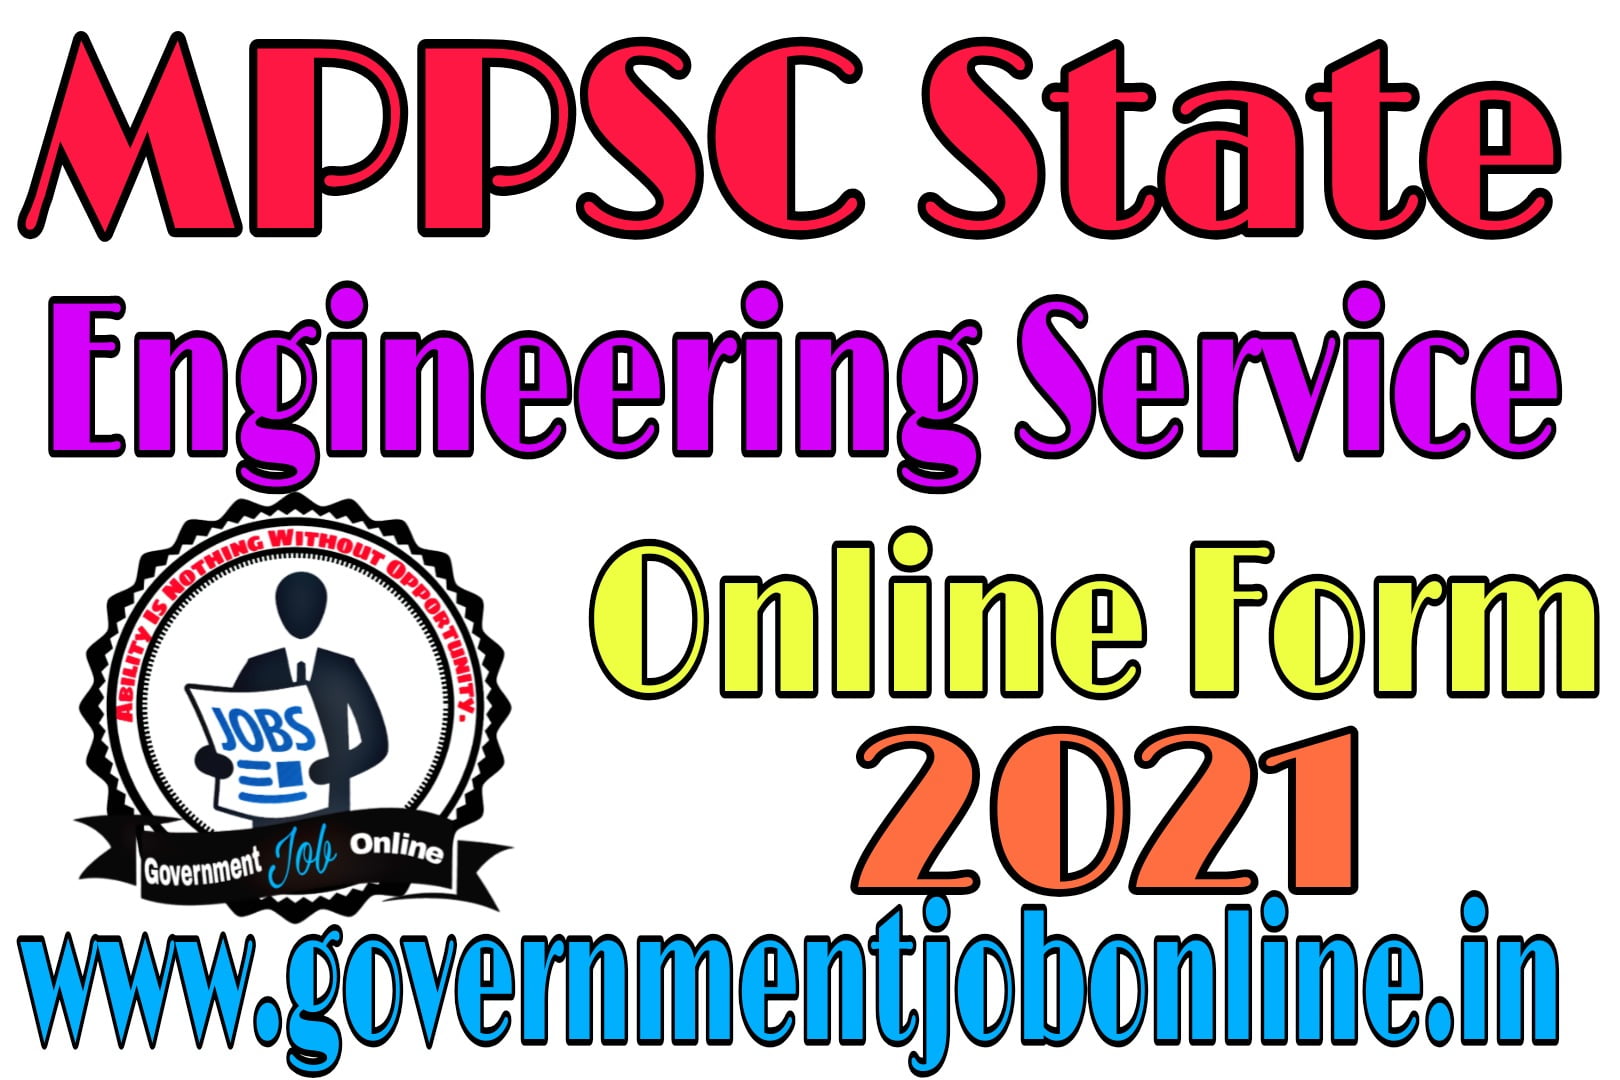 MPPSC State Engineering Service Online Form 2021